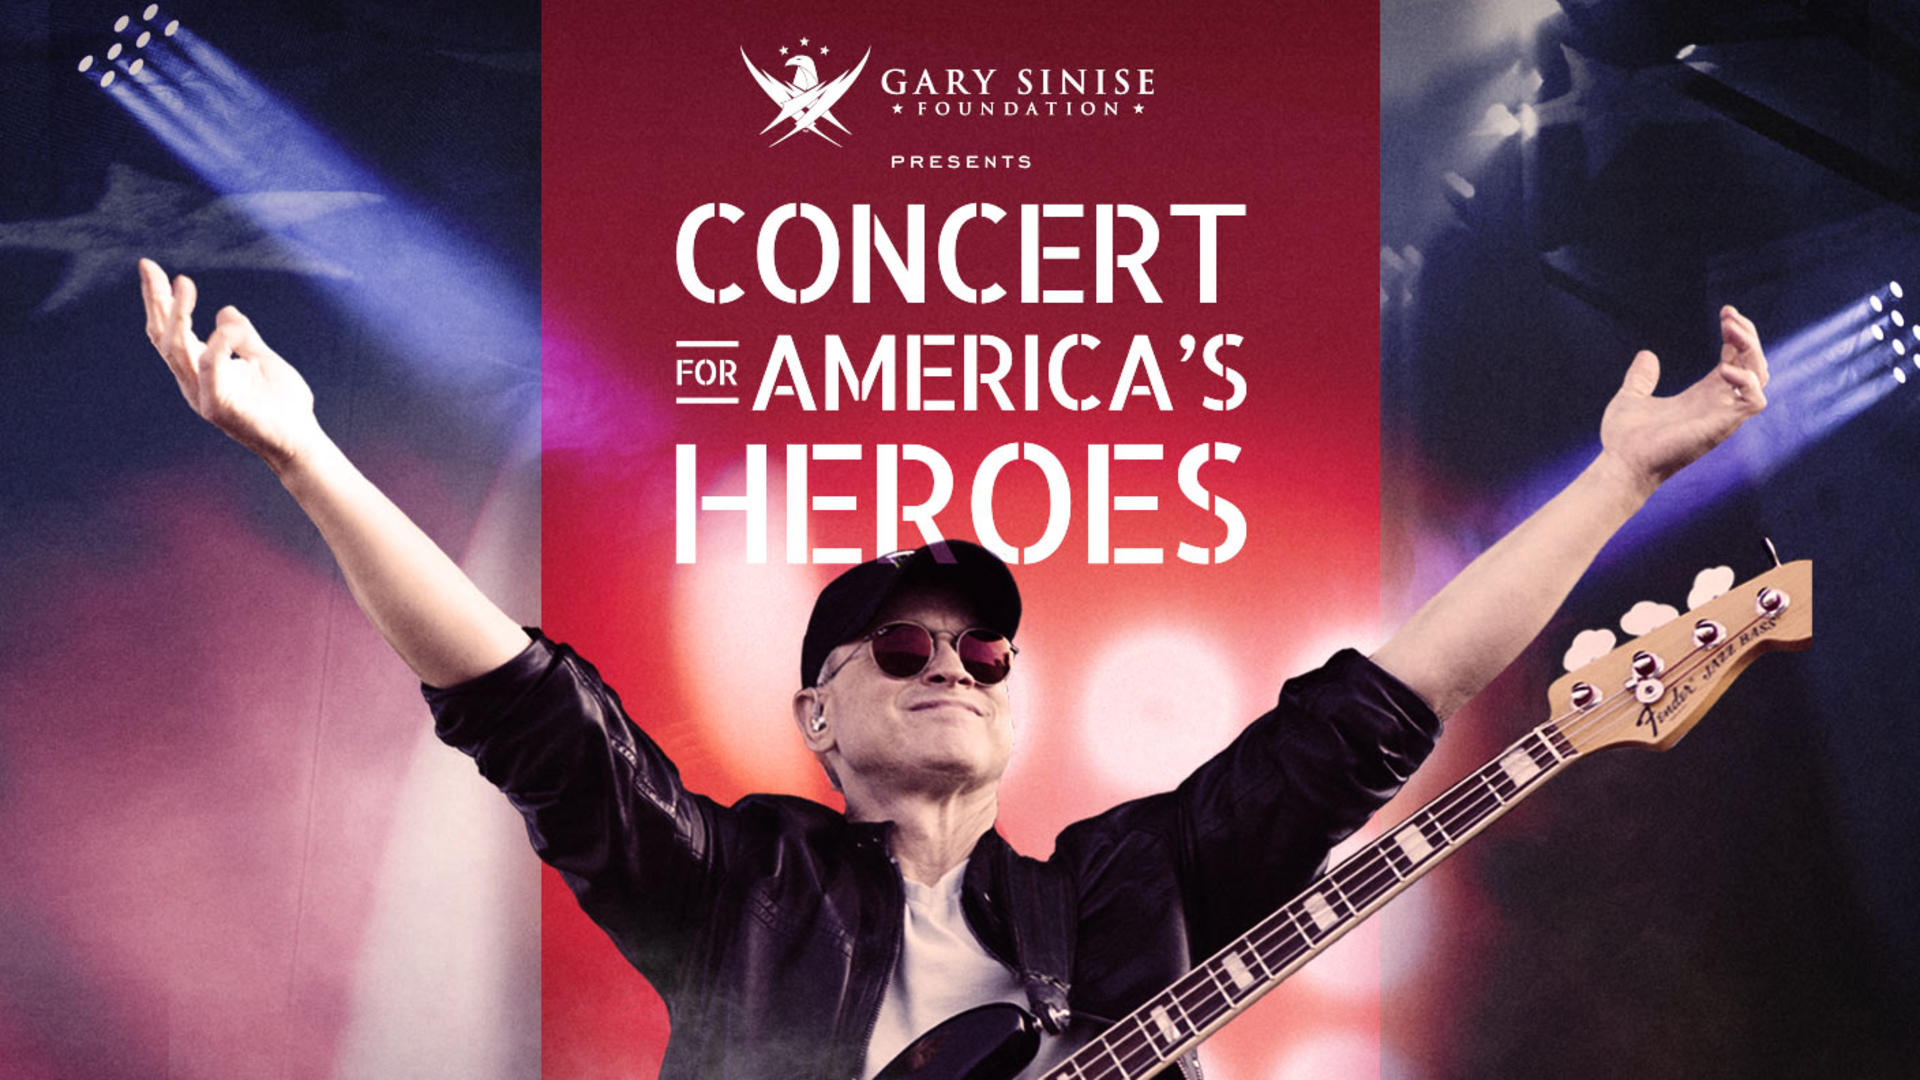 Concert for America's Heroes